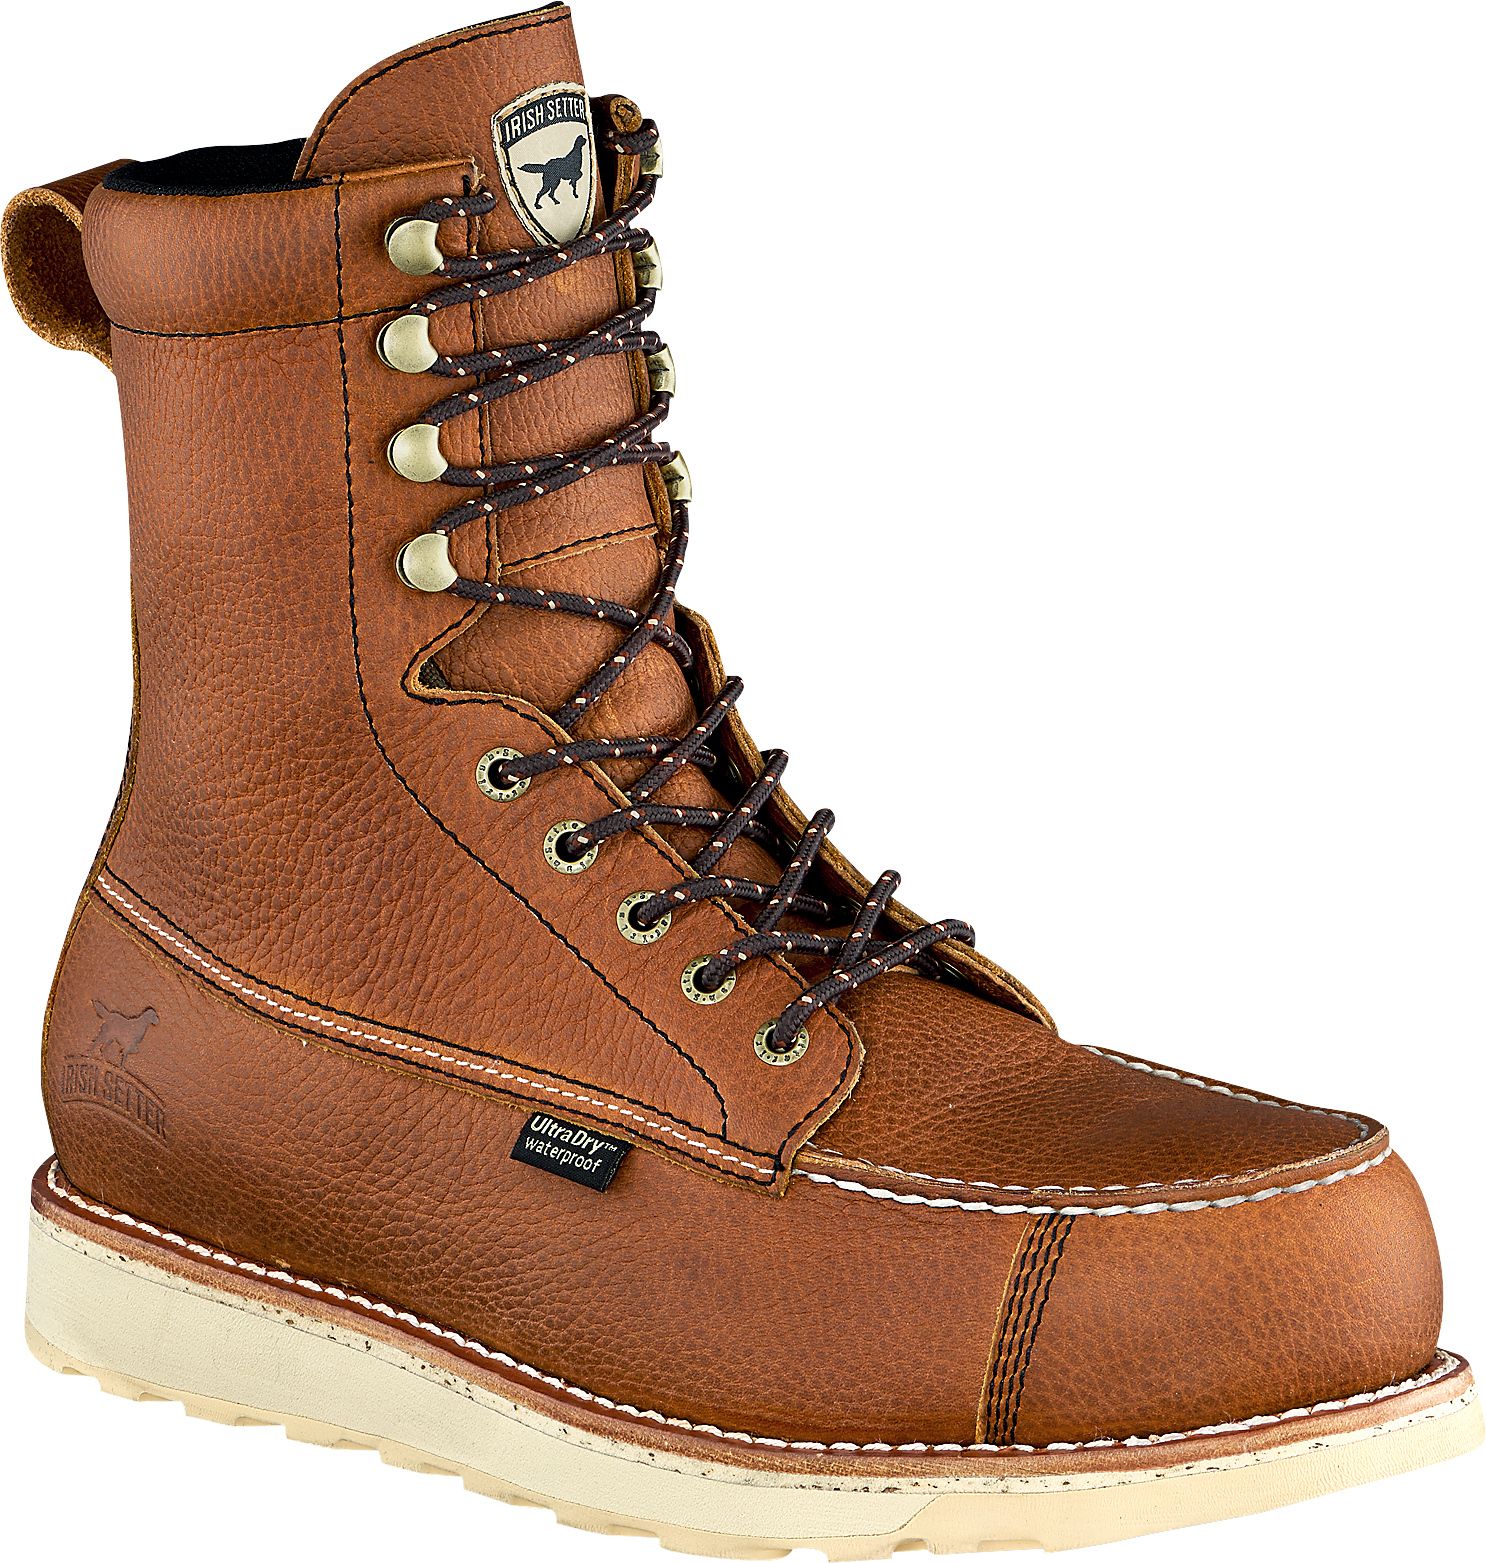 irish setter boots with composite toe